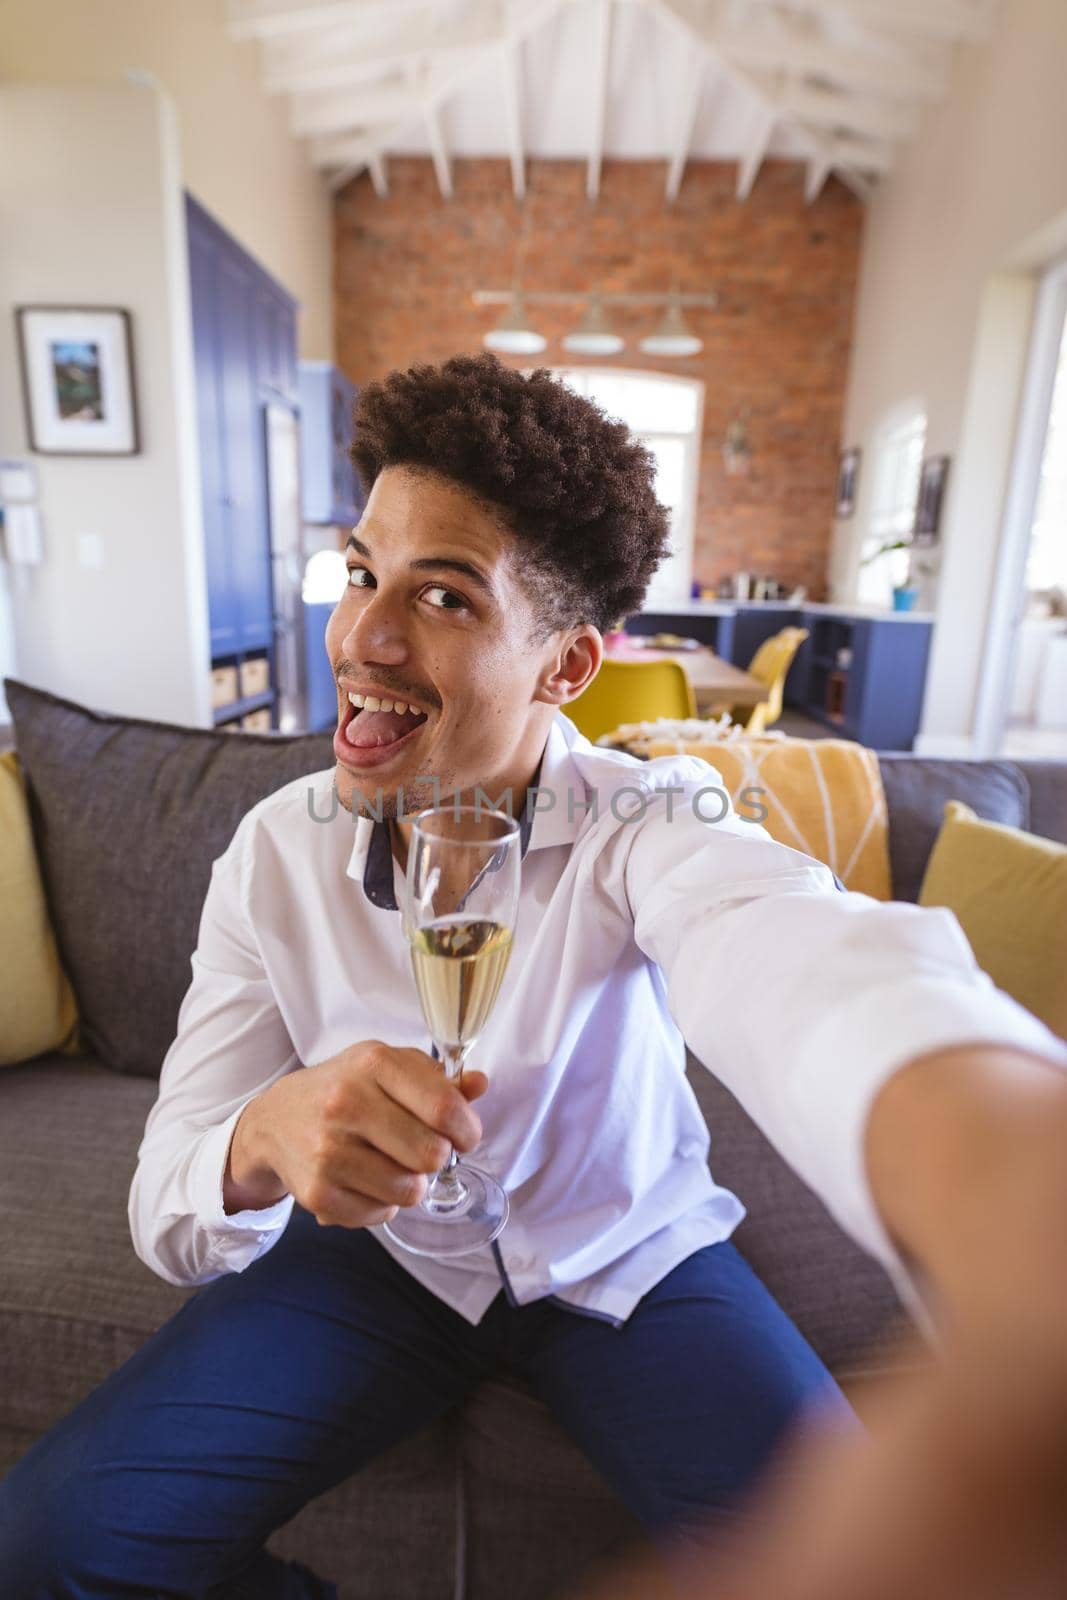 Portrait of cheerful young man holding champagne flute during virtual date at home by Wavebreakmedia